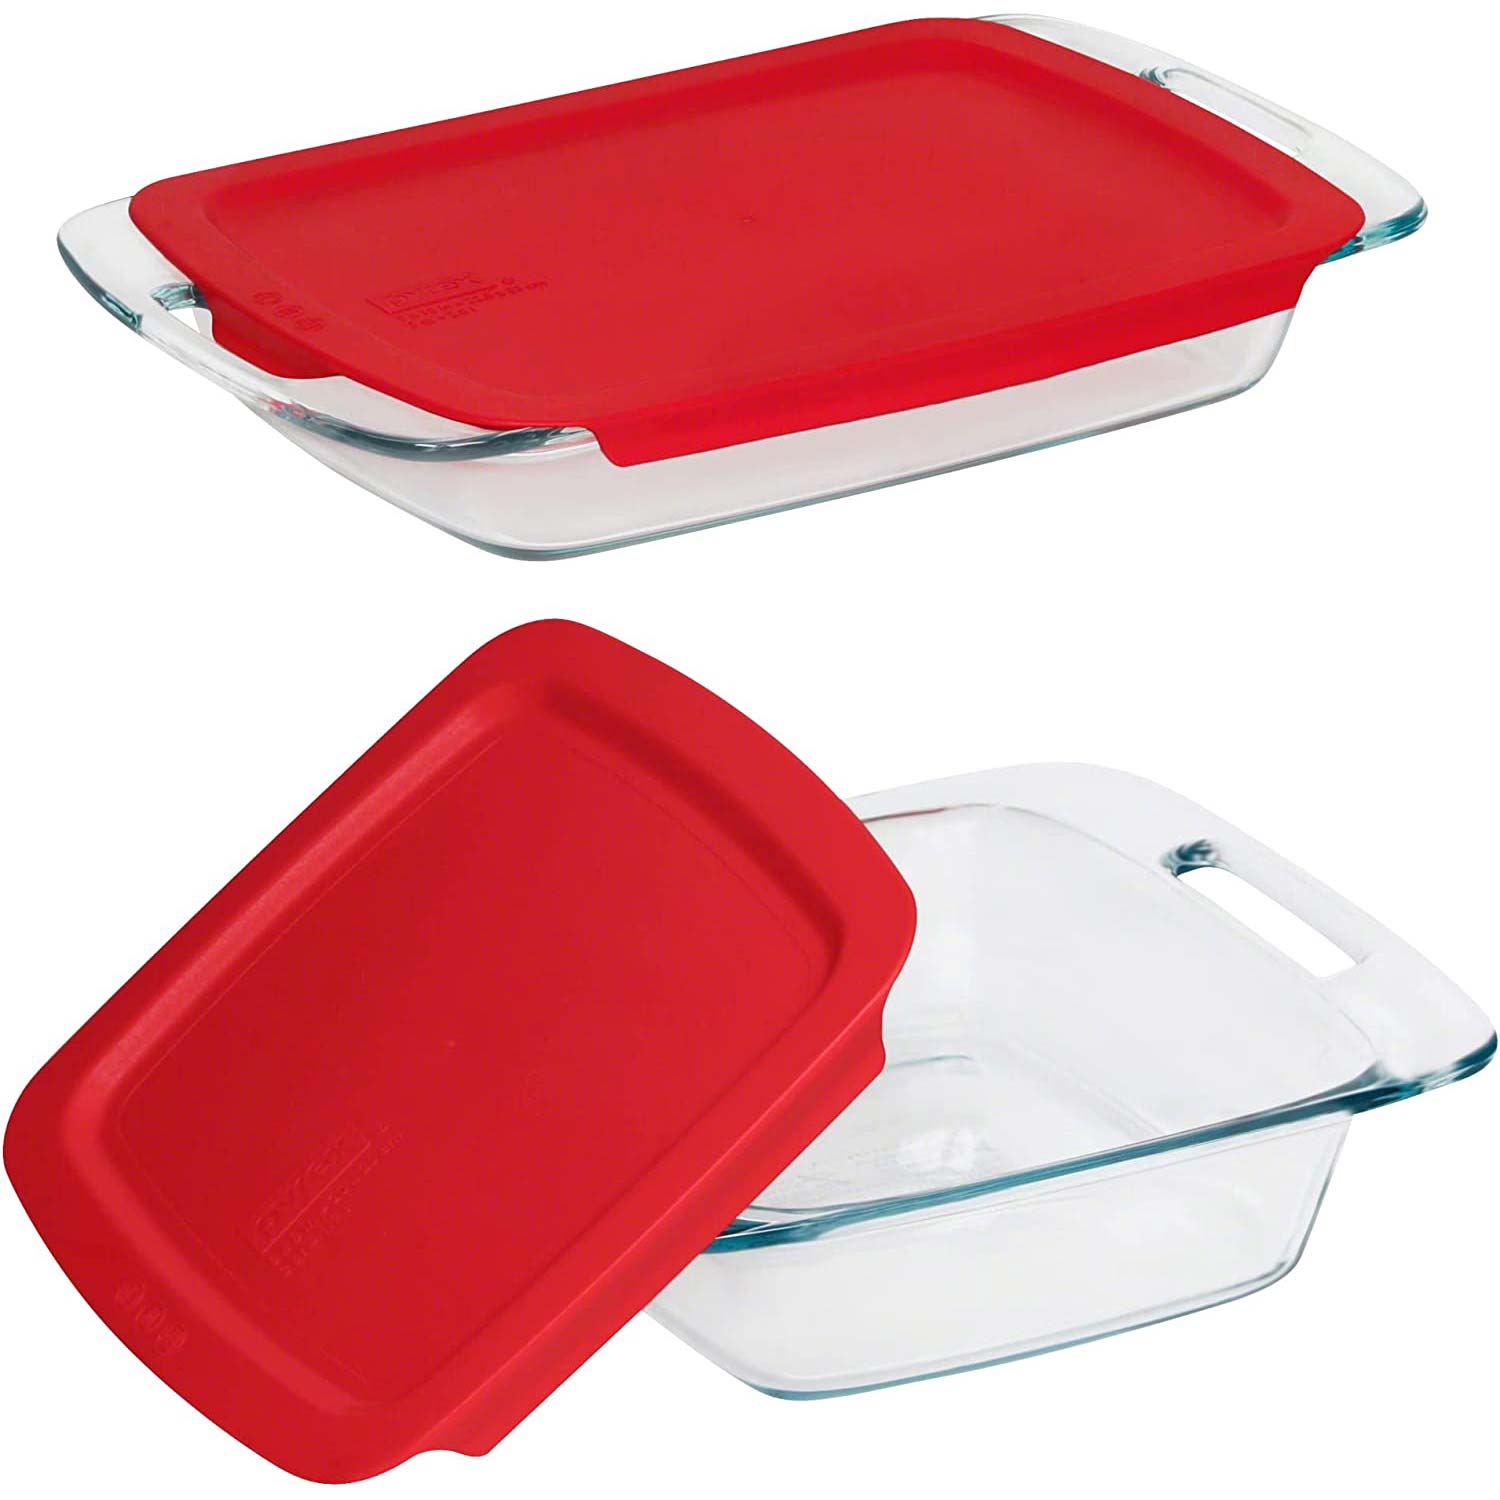 Pyrex Easy Grab 4-Piece Glass Baking Dish Set with Lids - The